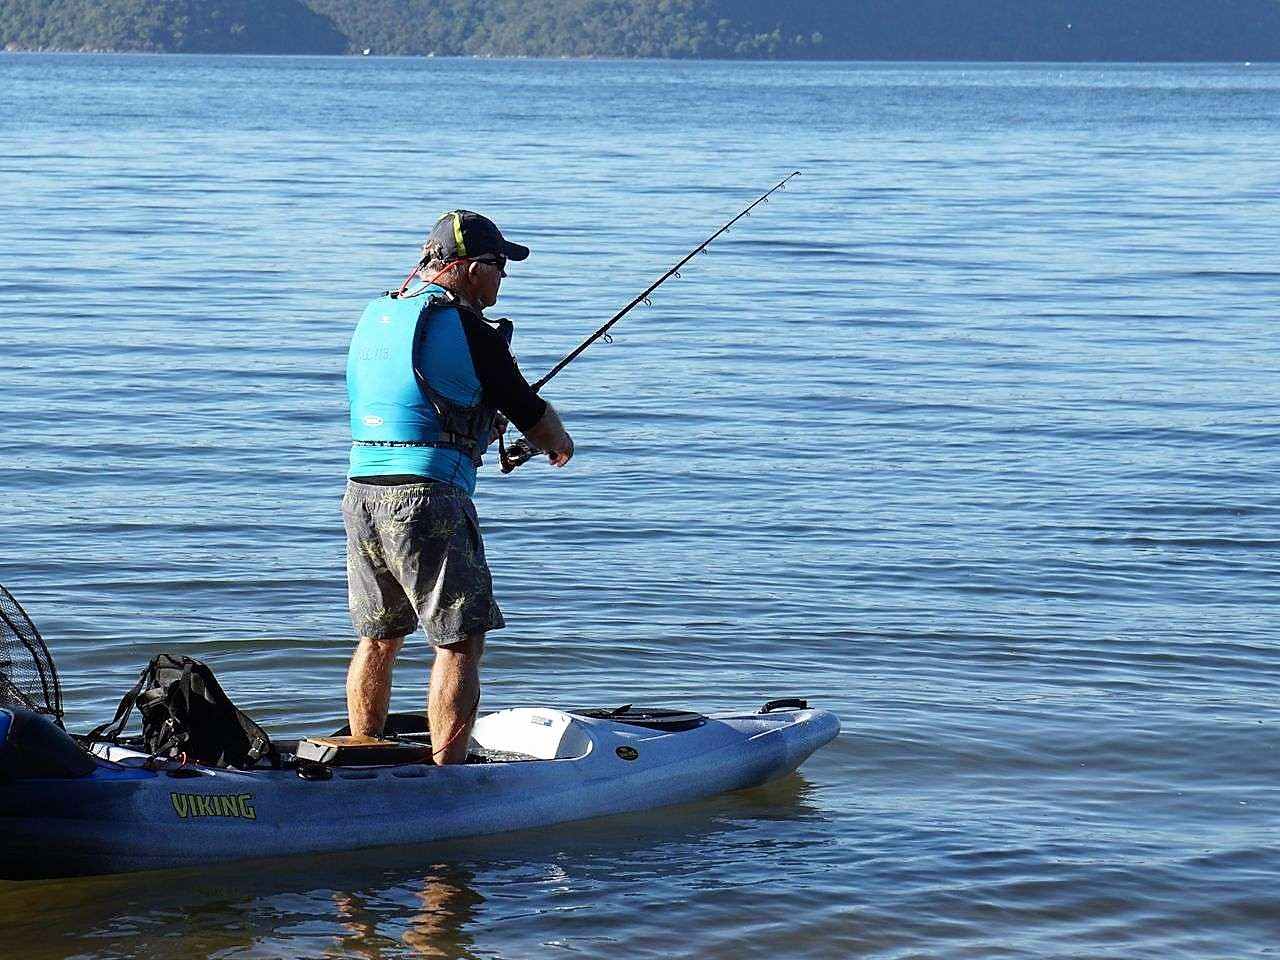 Advanced Elements Inflatable Kayaks now available at Kayak Central Coast